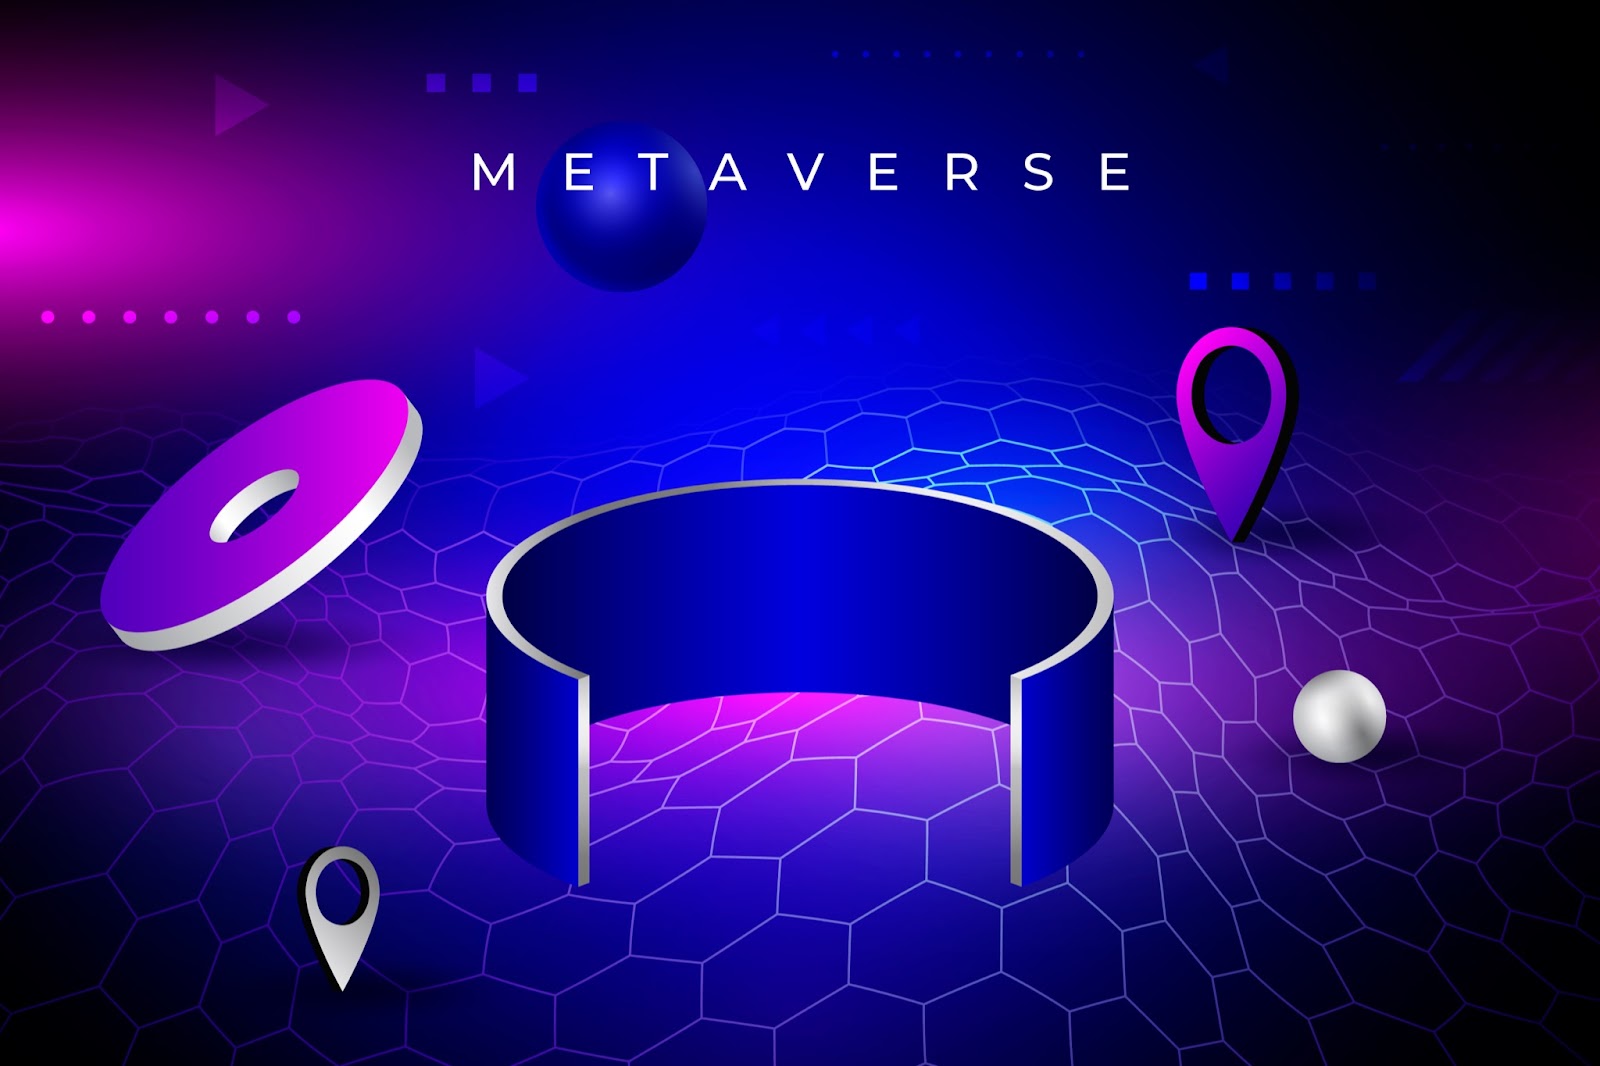 Why are NFTs essential to the Metaverse?